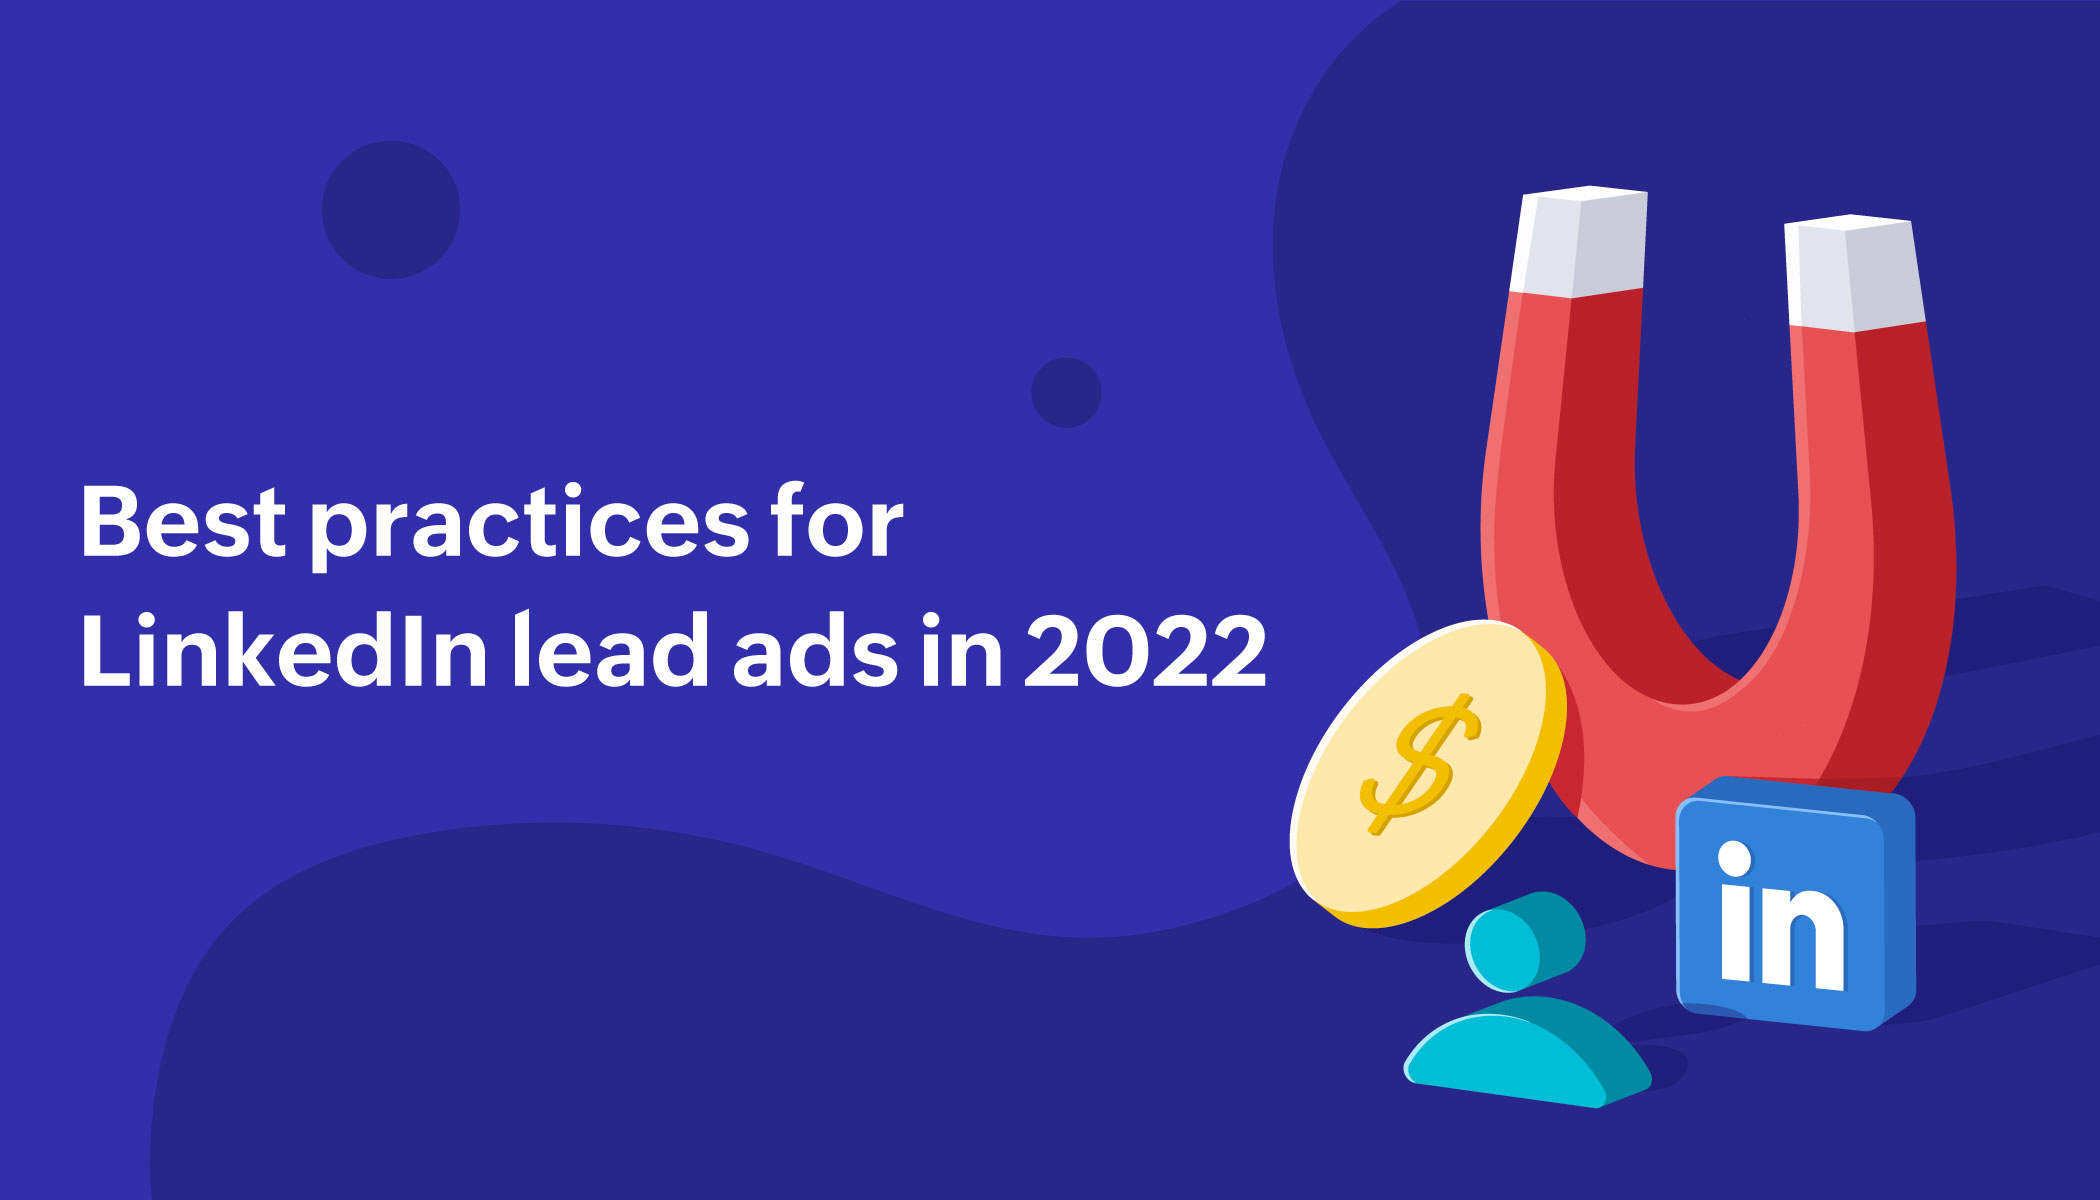 Best practices for LinkedIn lead ads in 2022